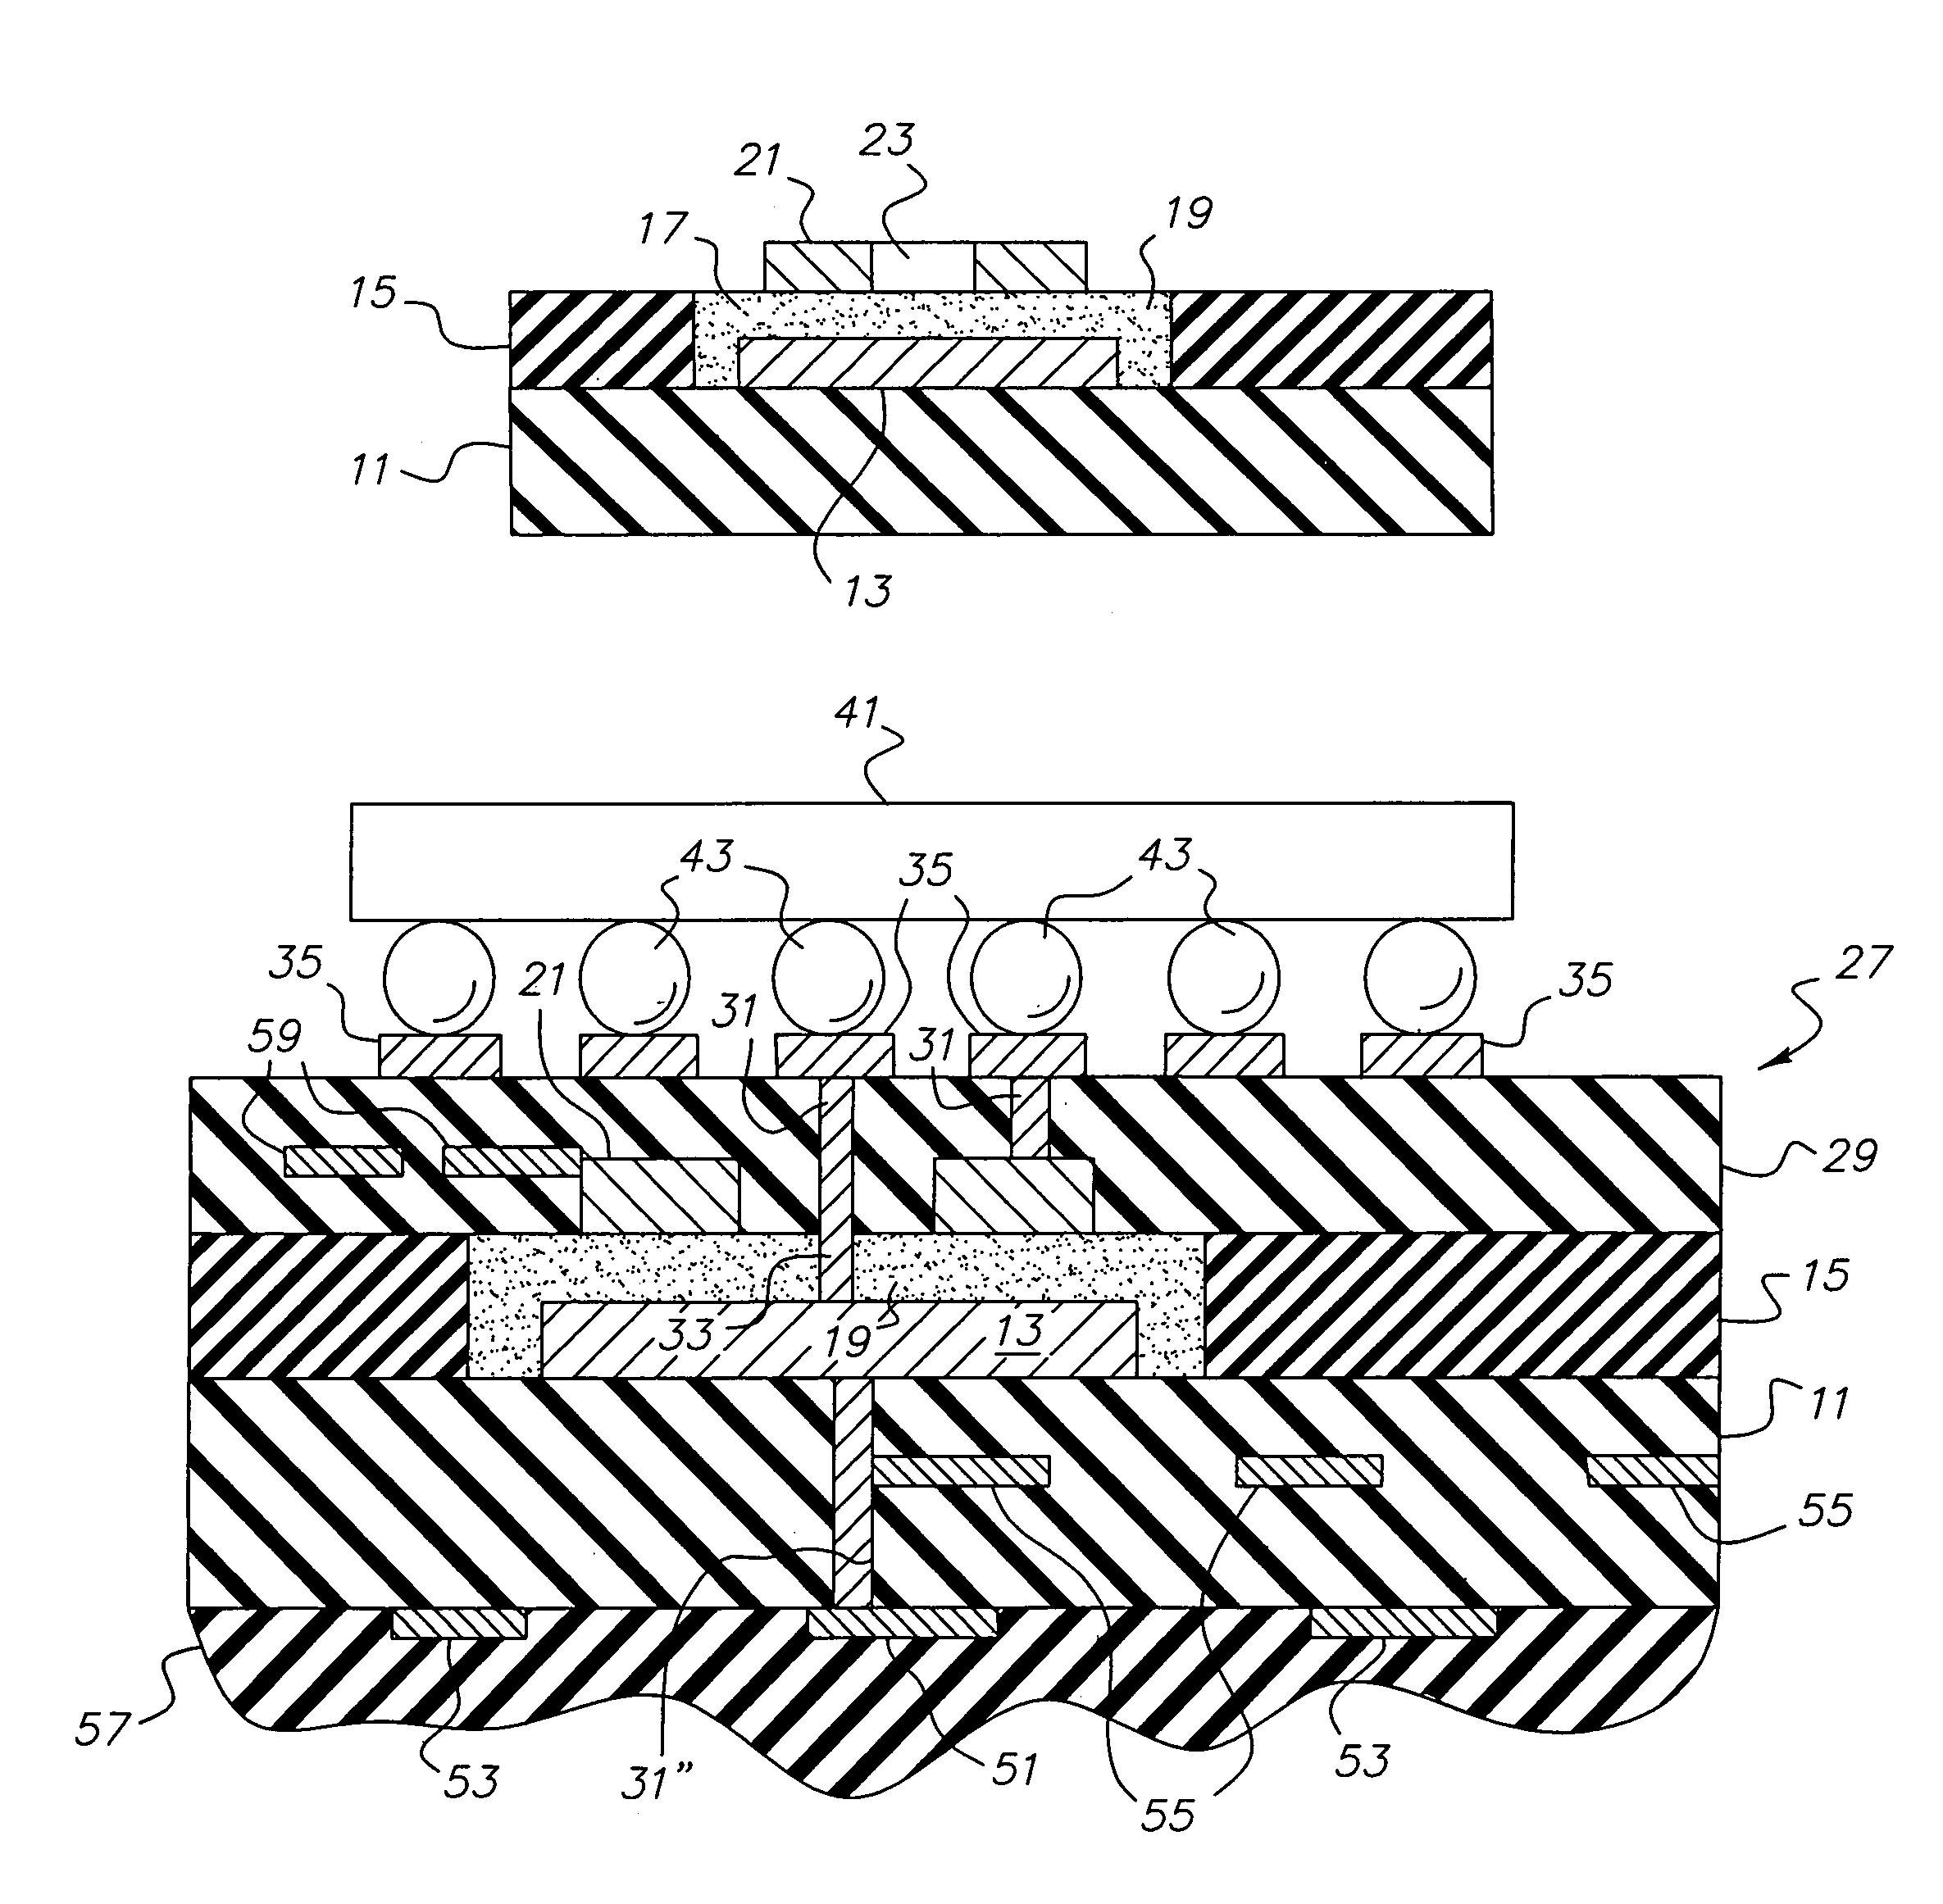 Capacitor material with metal component for use in circuitized substrates, circuitized substrate utilizing same, method of making said circuitized substrate, and information handling system utilizing said circuitized substrate